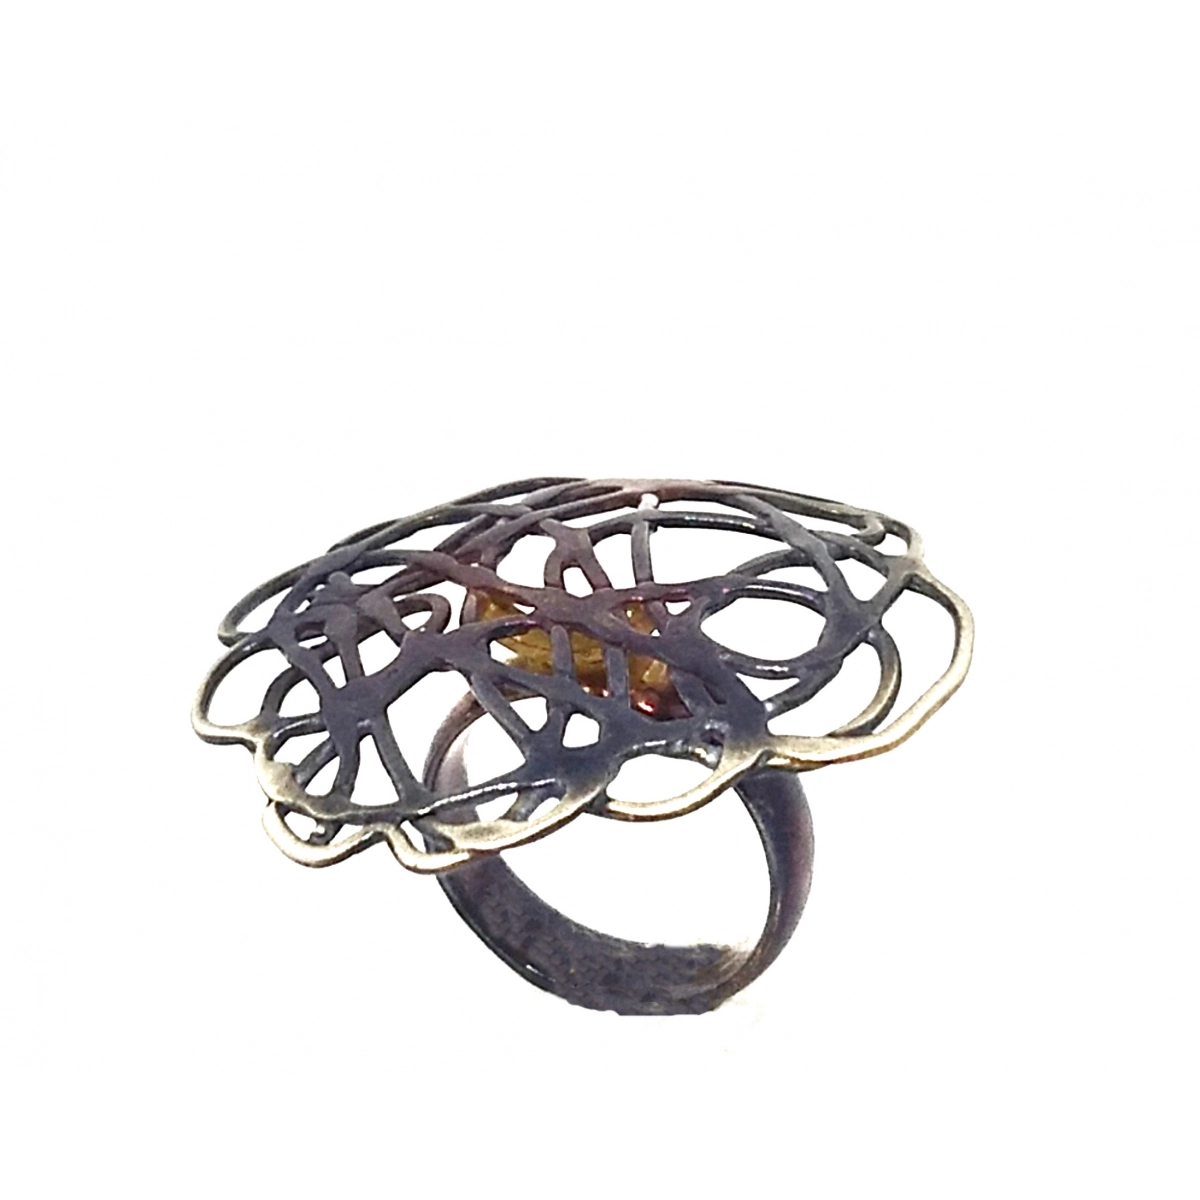 RING SILVER FINK ENAMELED IN SHADES OF PURPLE AND OCHRE T11730